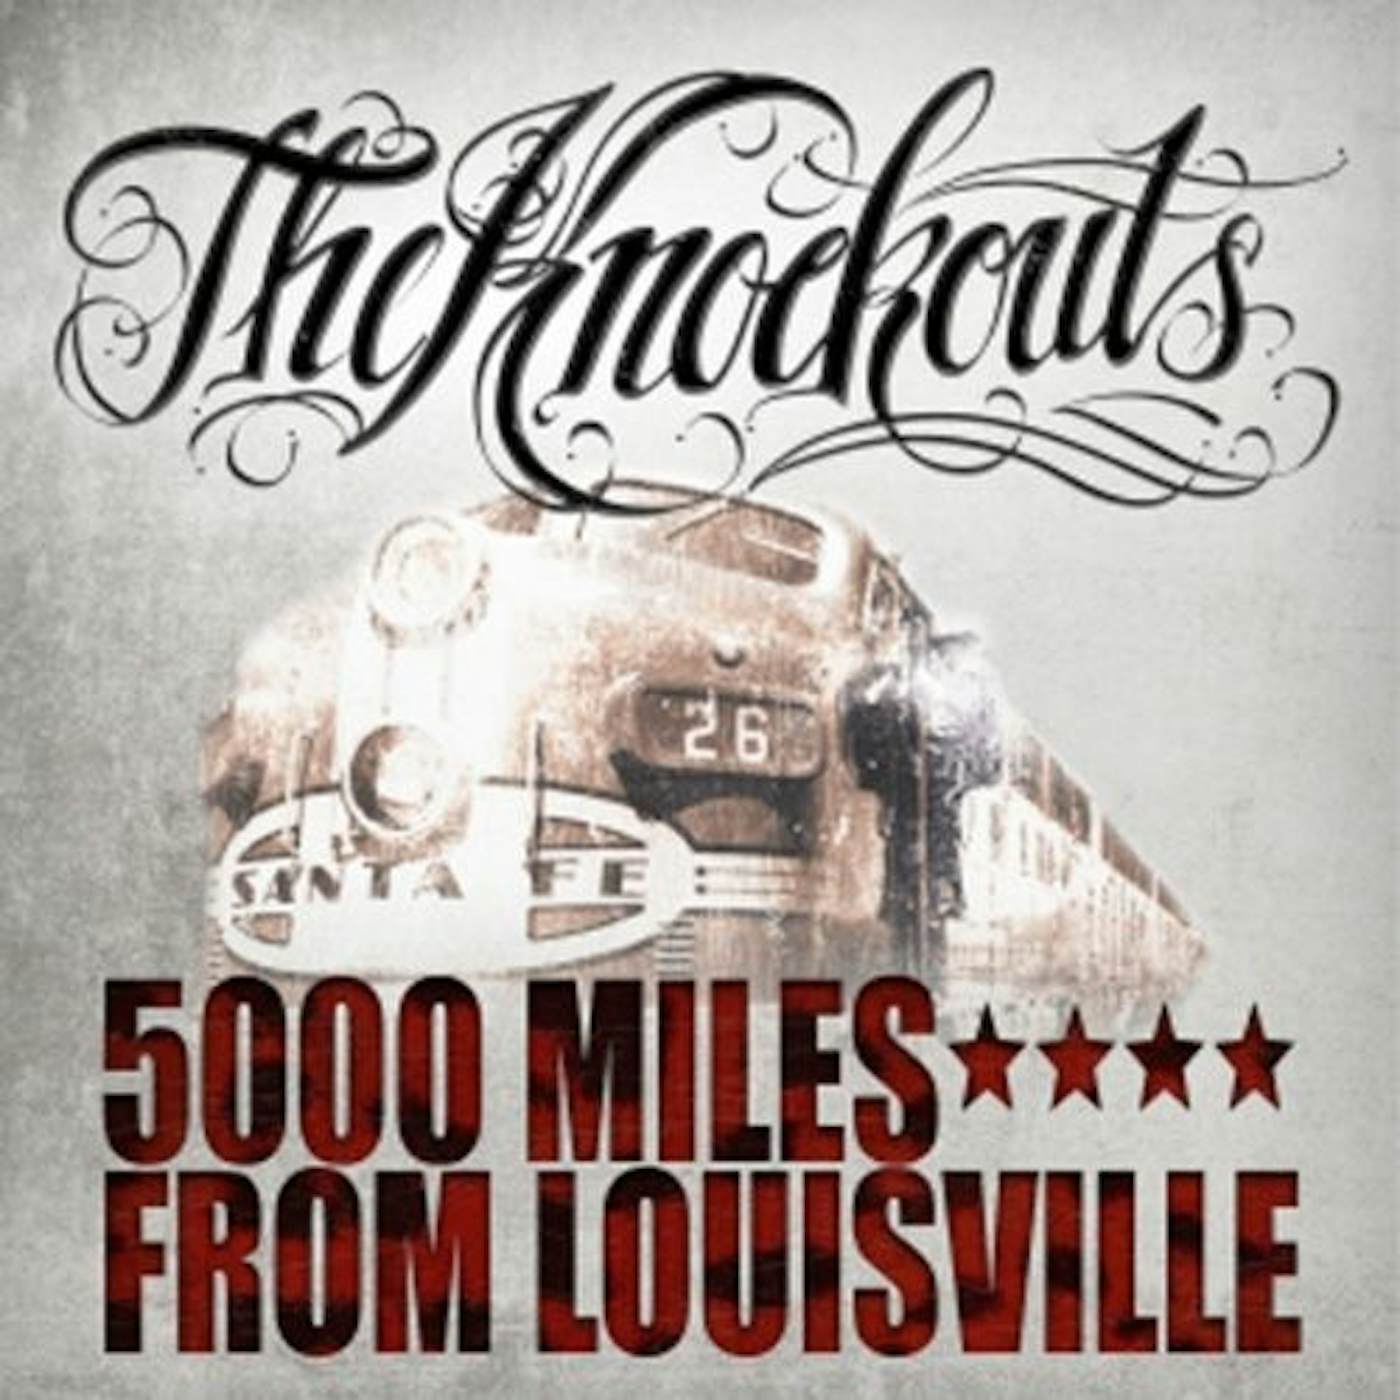 Knockouts 5000 MILES FROM LOUISVILLE Vinyl Record